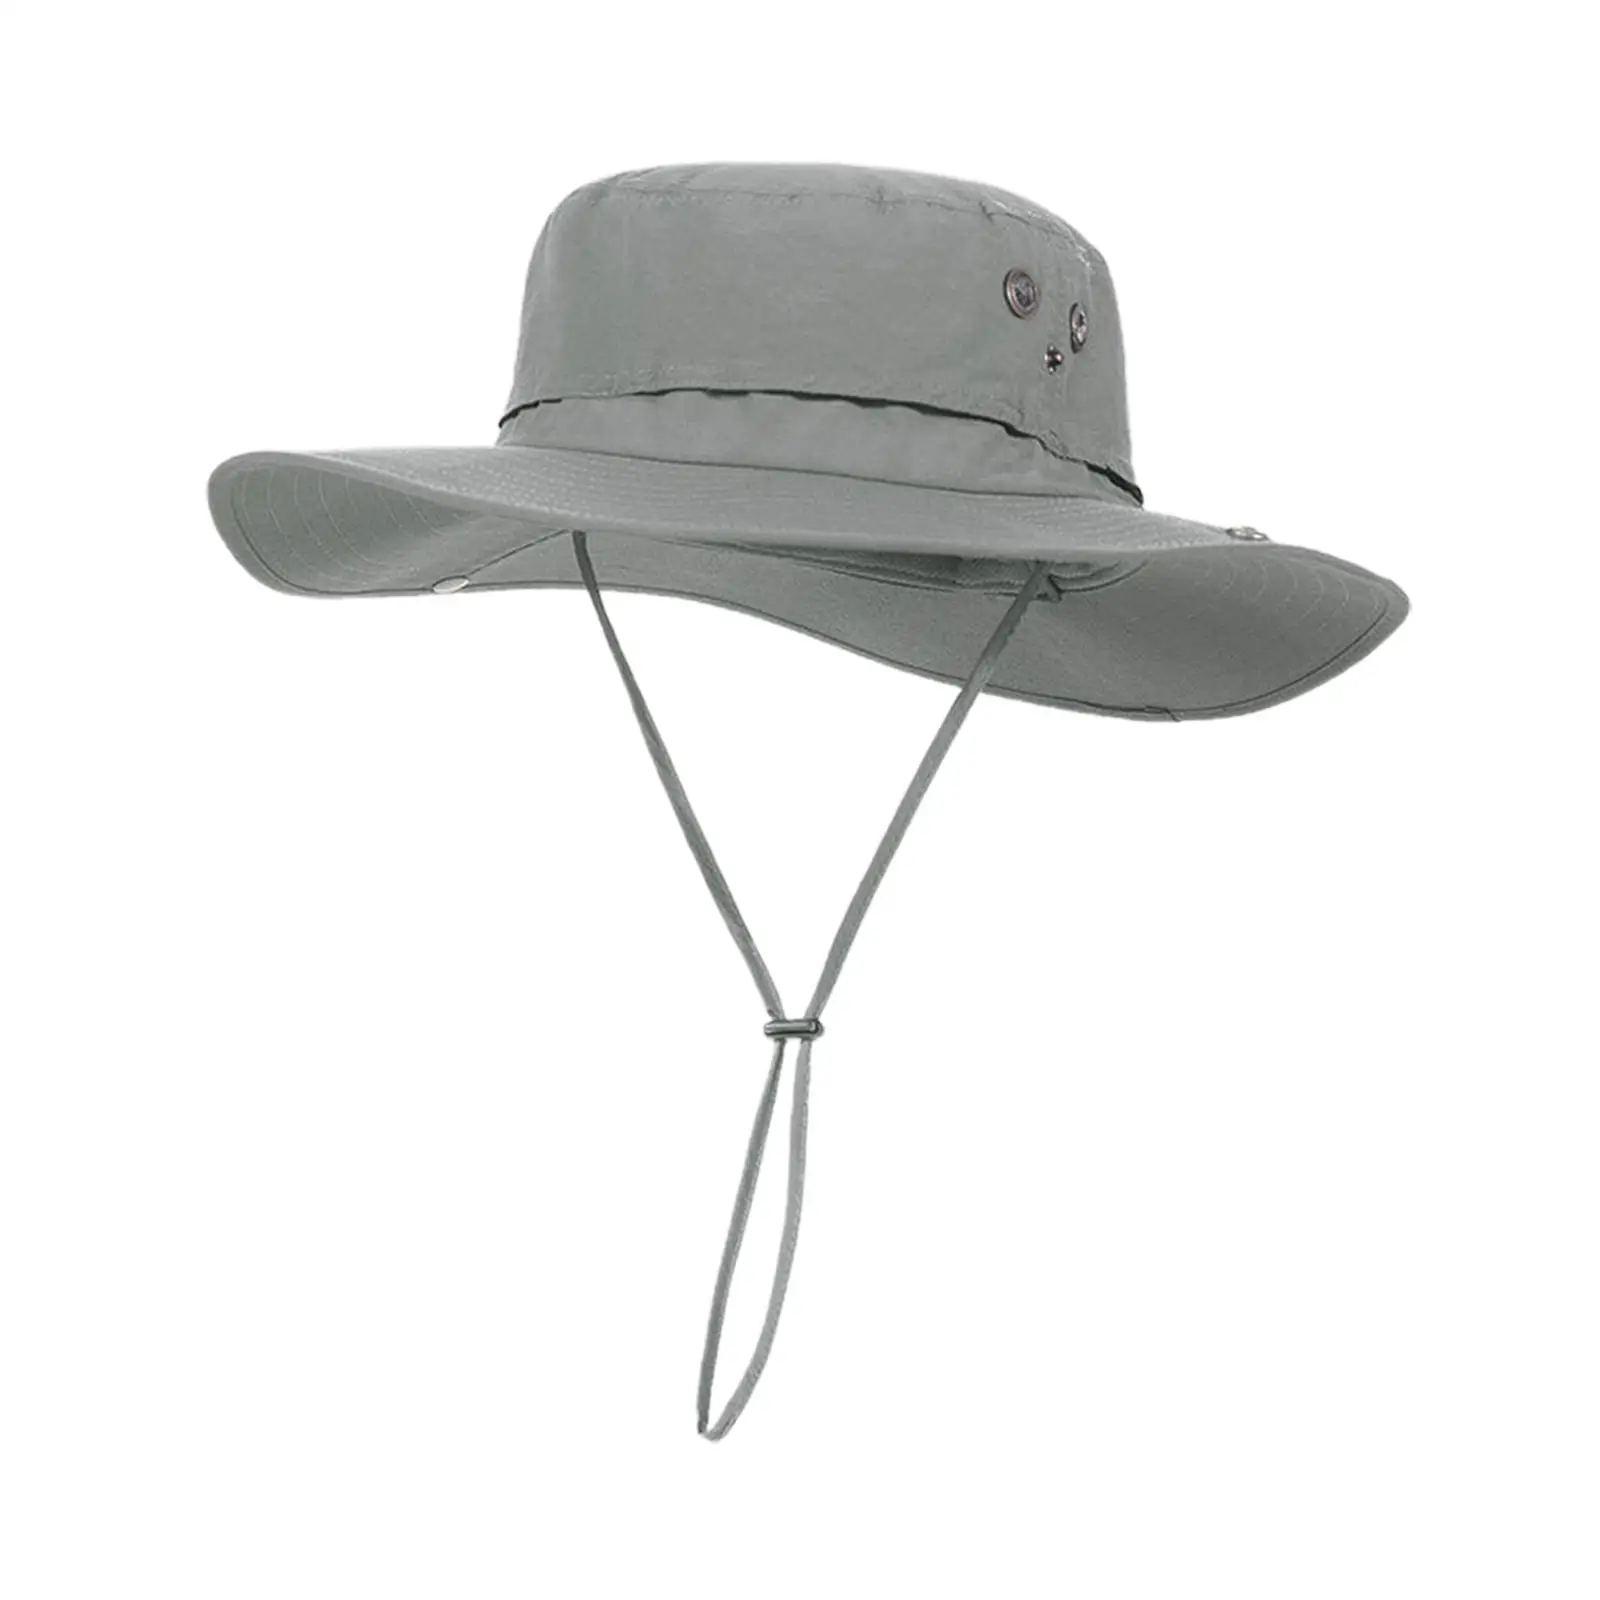 Sun Hat Foldable Breathable Bucket Hat Sunhat for Summer Camping Travel Fishing Hat Adult